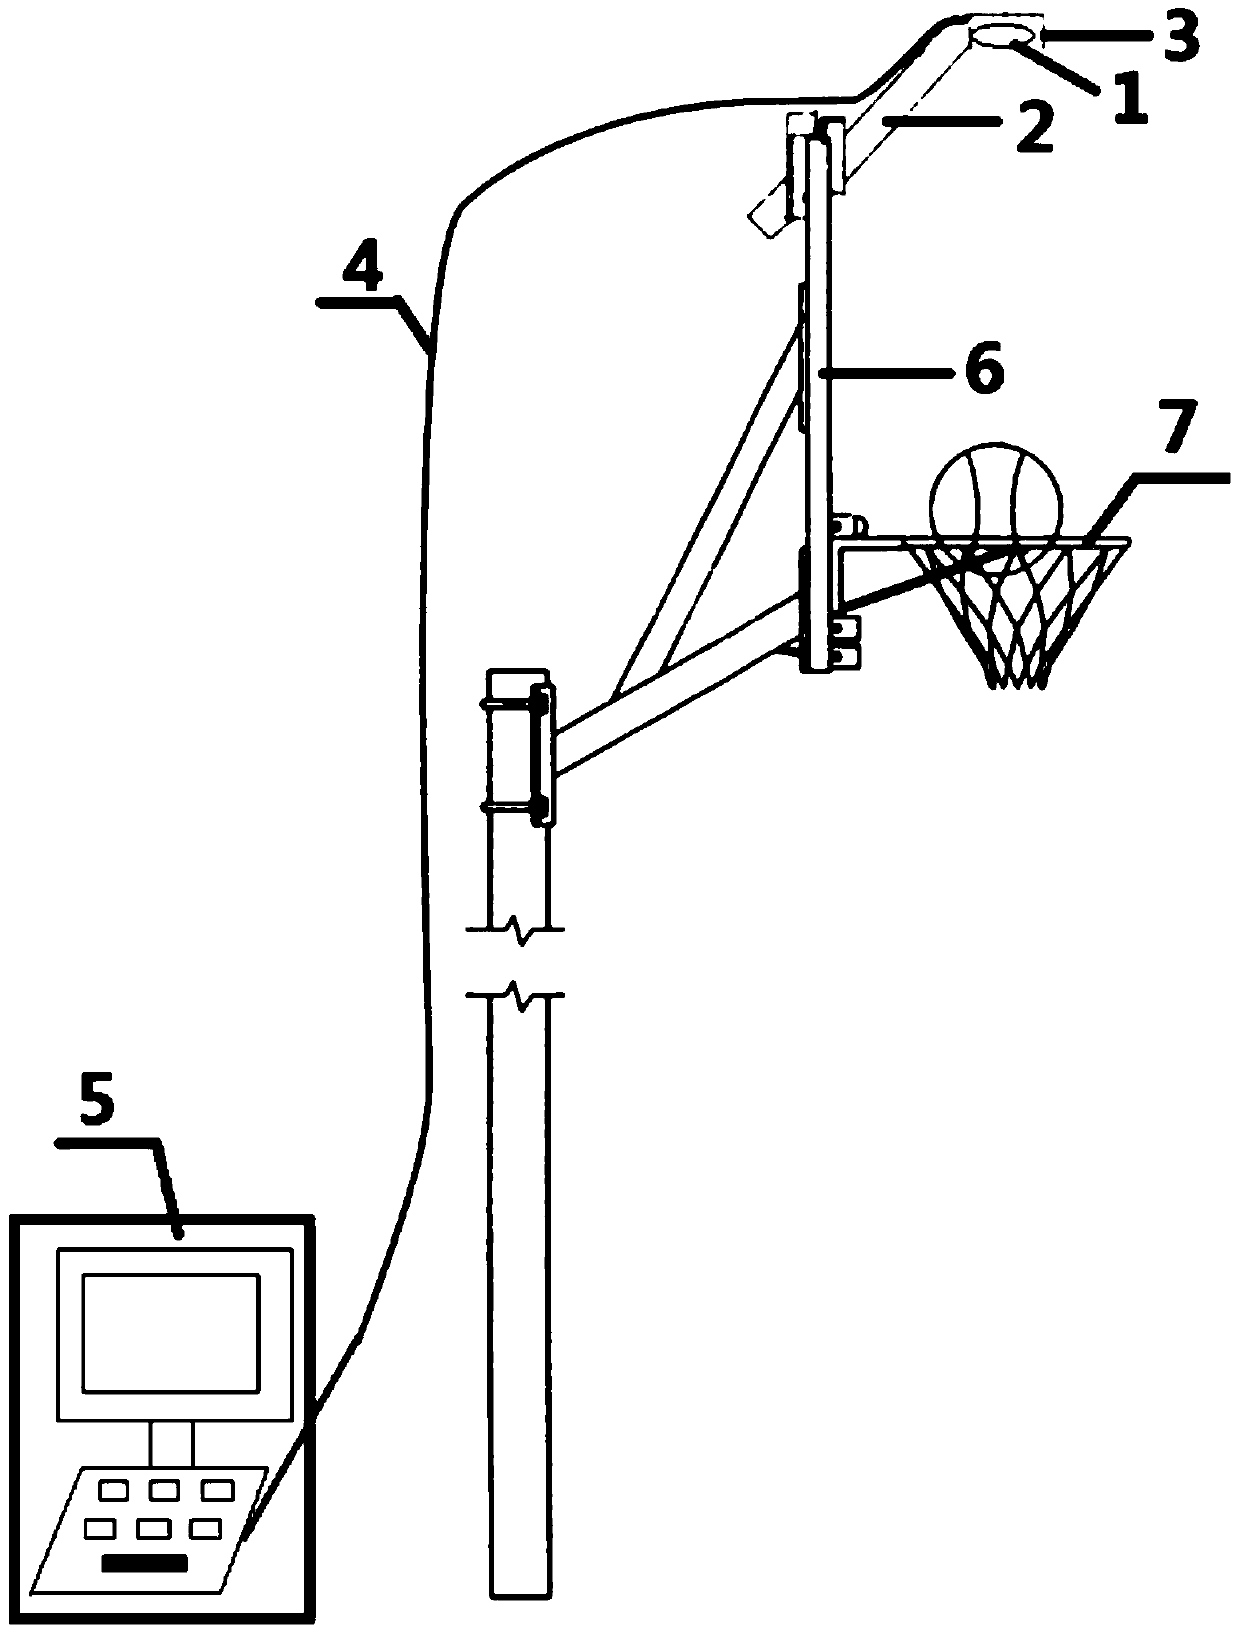 A shot counting method based on a shot counting device